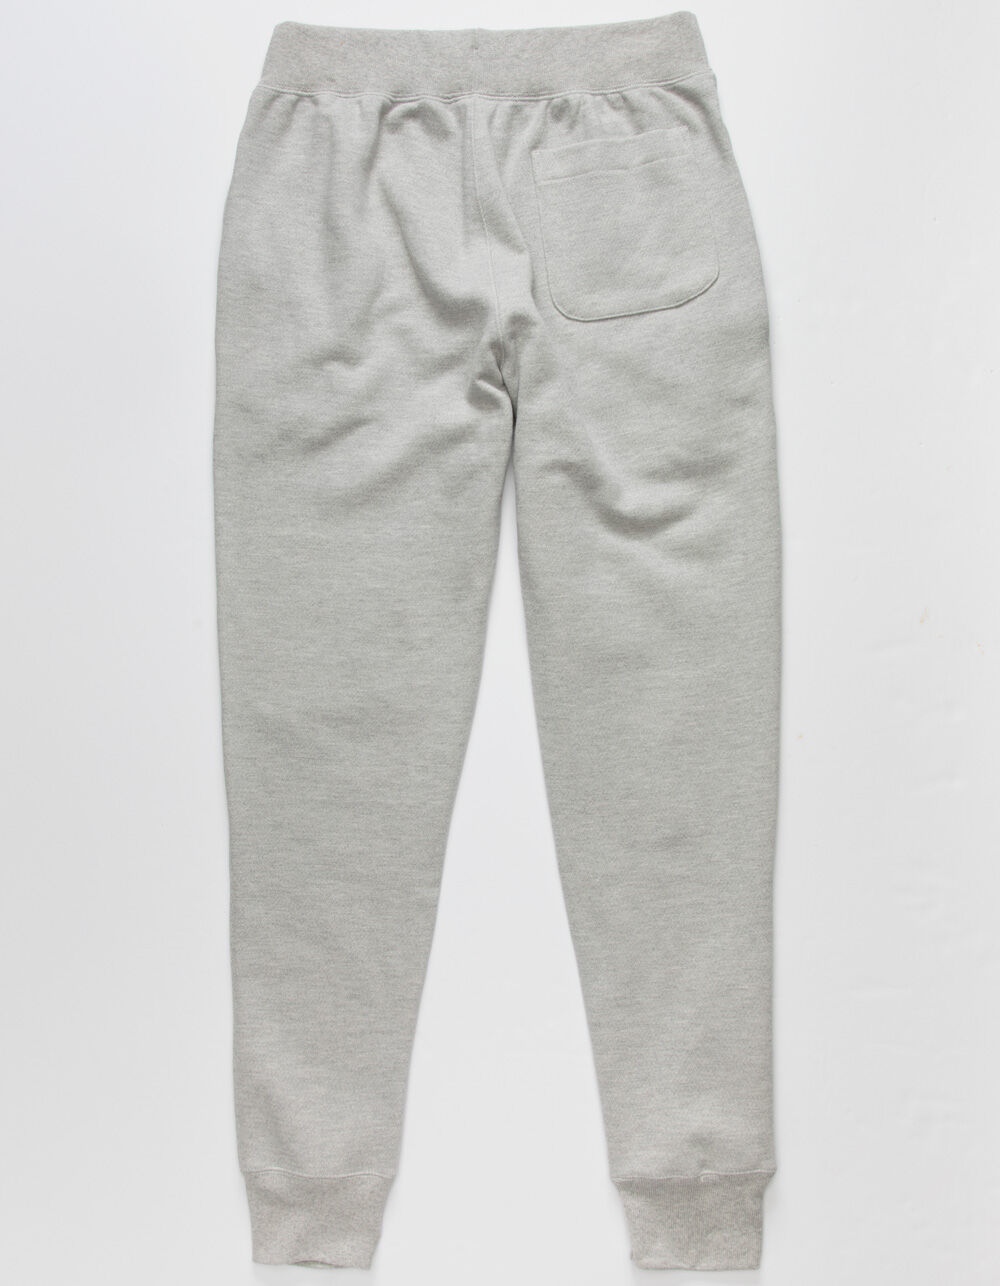 CHAMPION Chenille Ombre Mens Sweatpants - HEATHER GRAY | Tillys